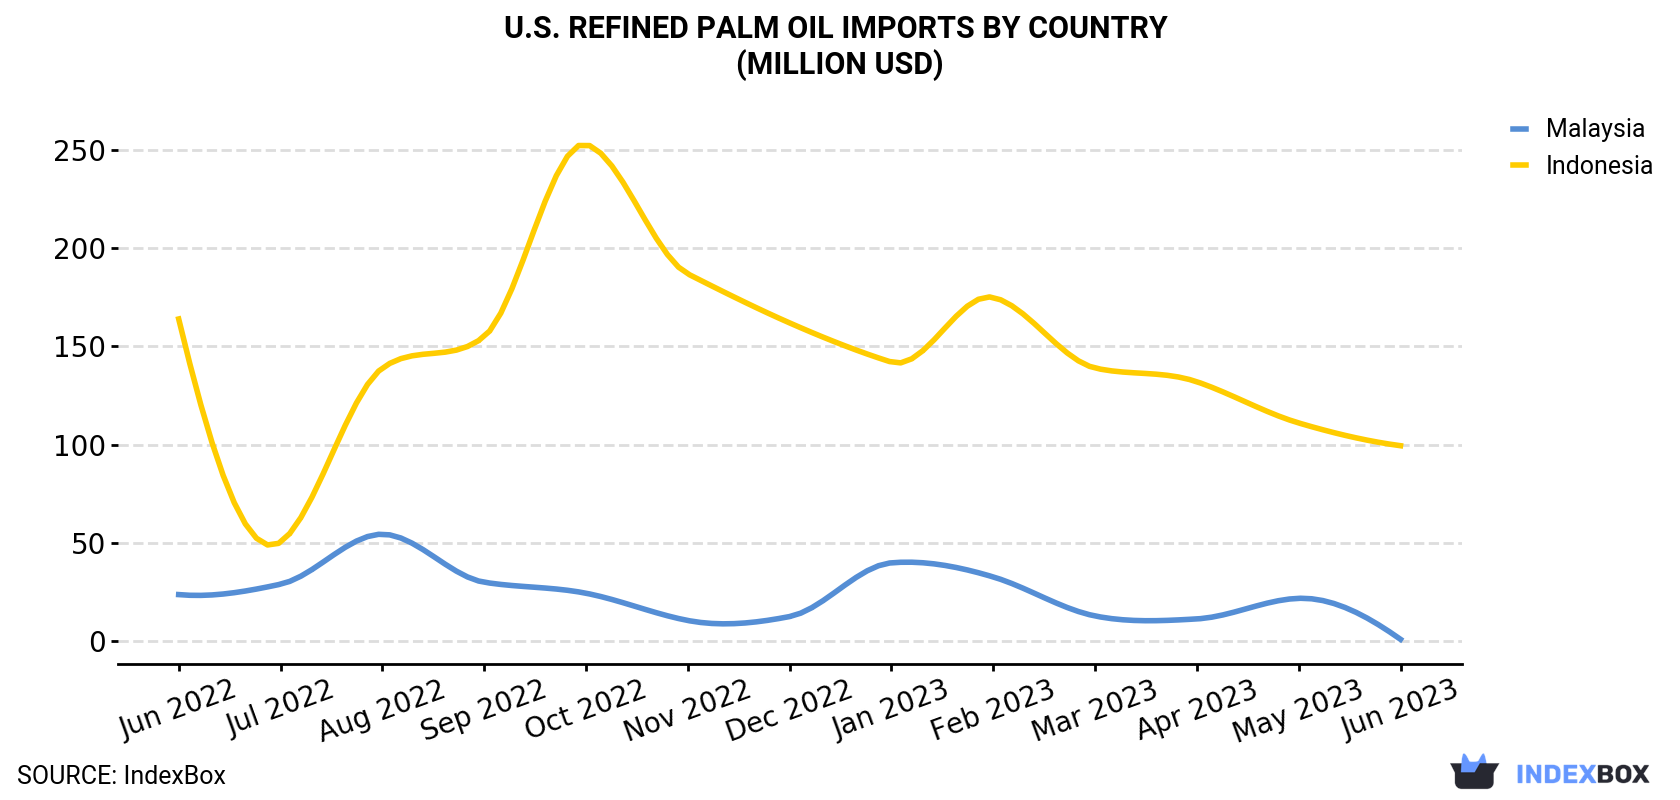 U.S. Refined Palm Oil Imports By Country (Million USD)